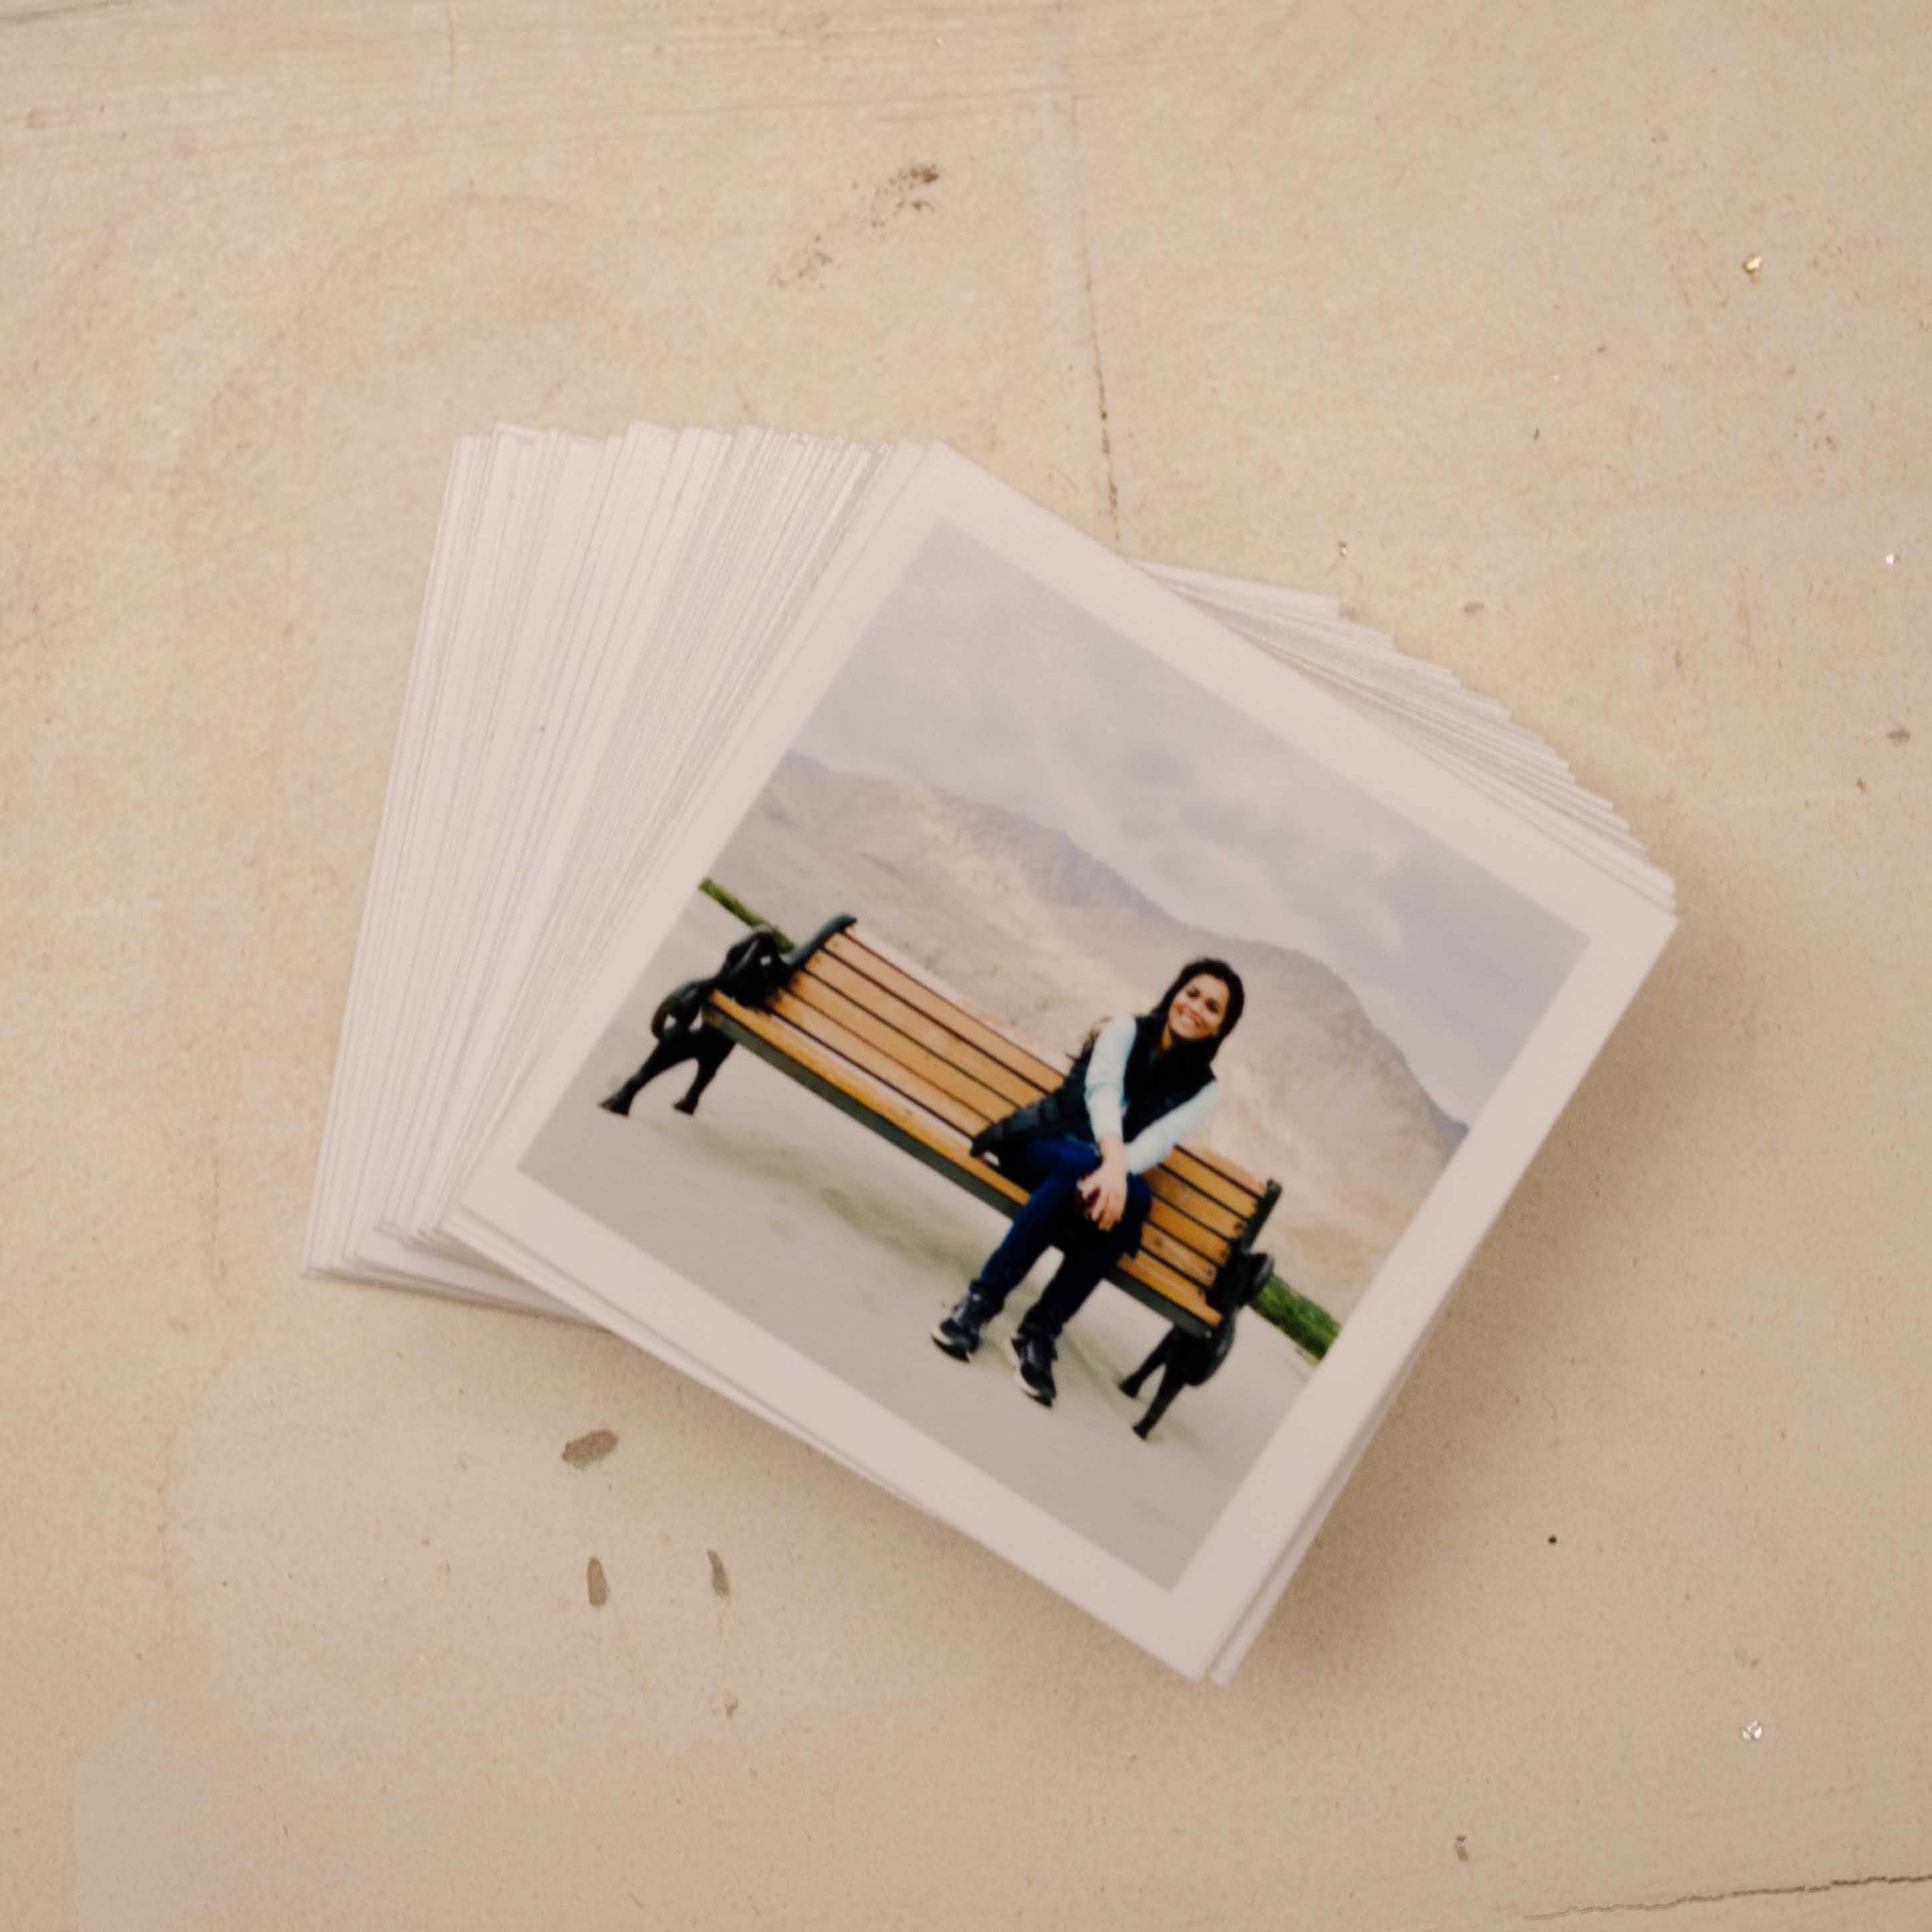 small size photo prints from gicly miniatures